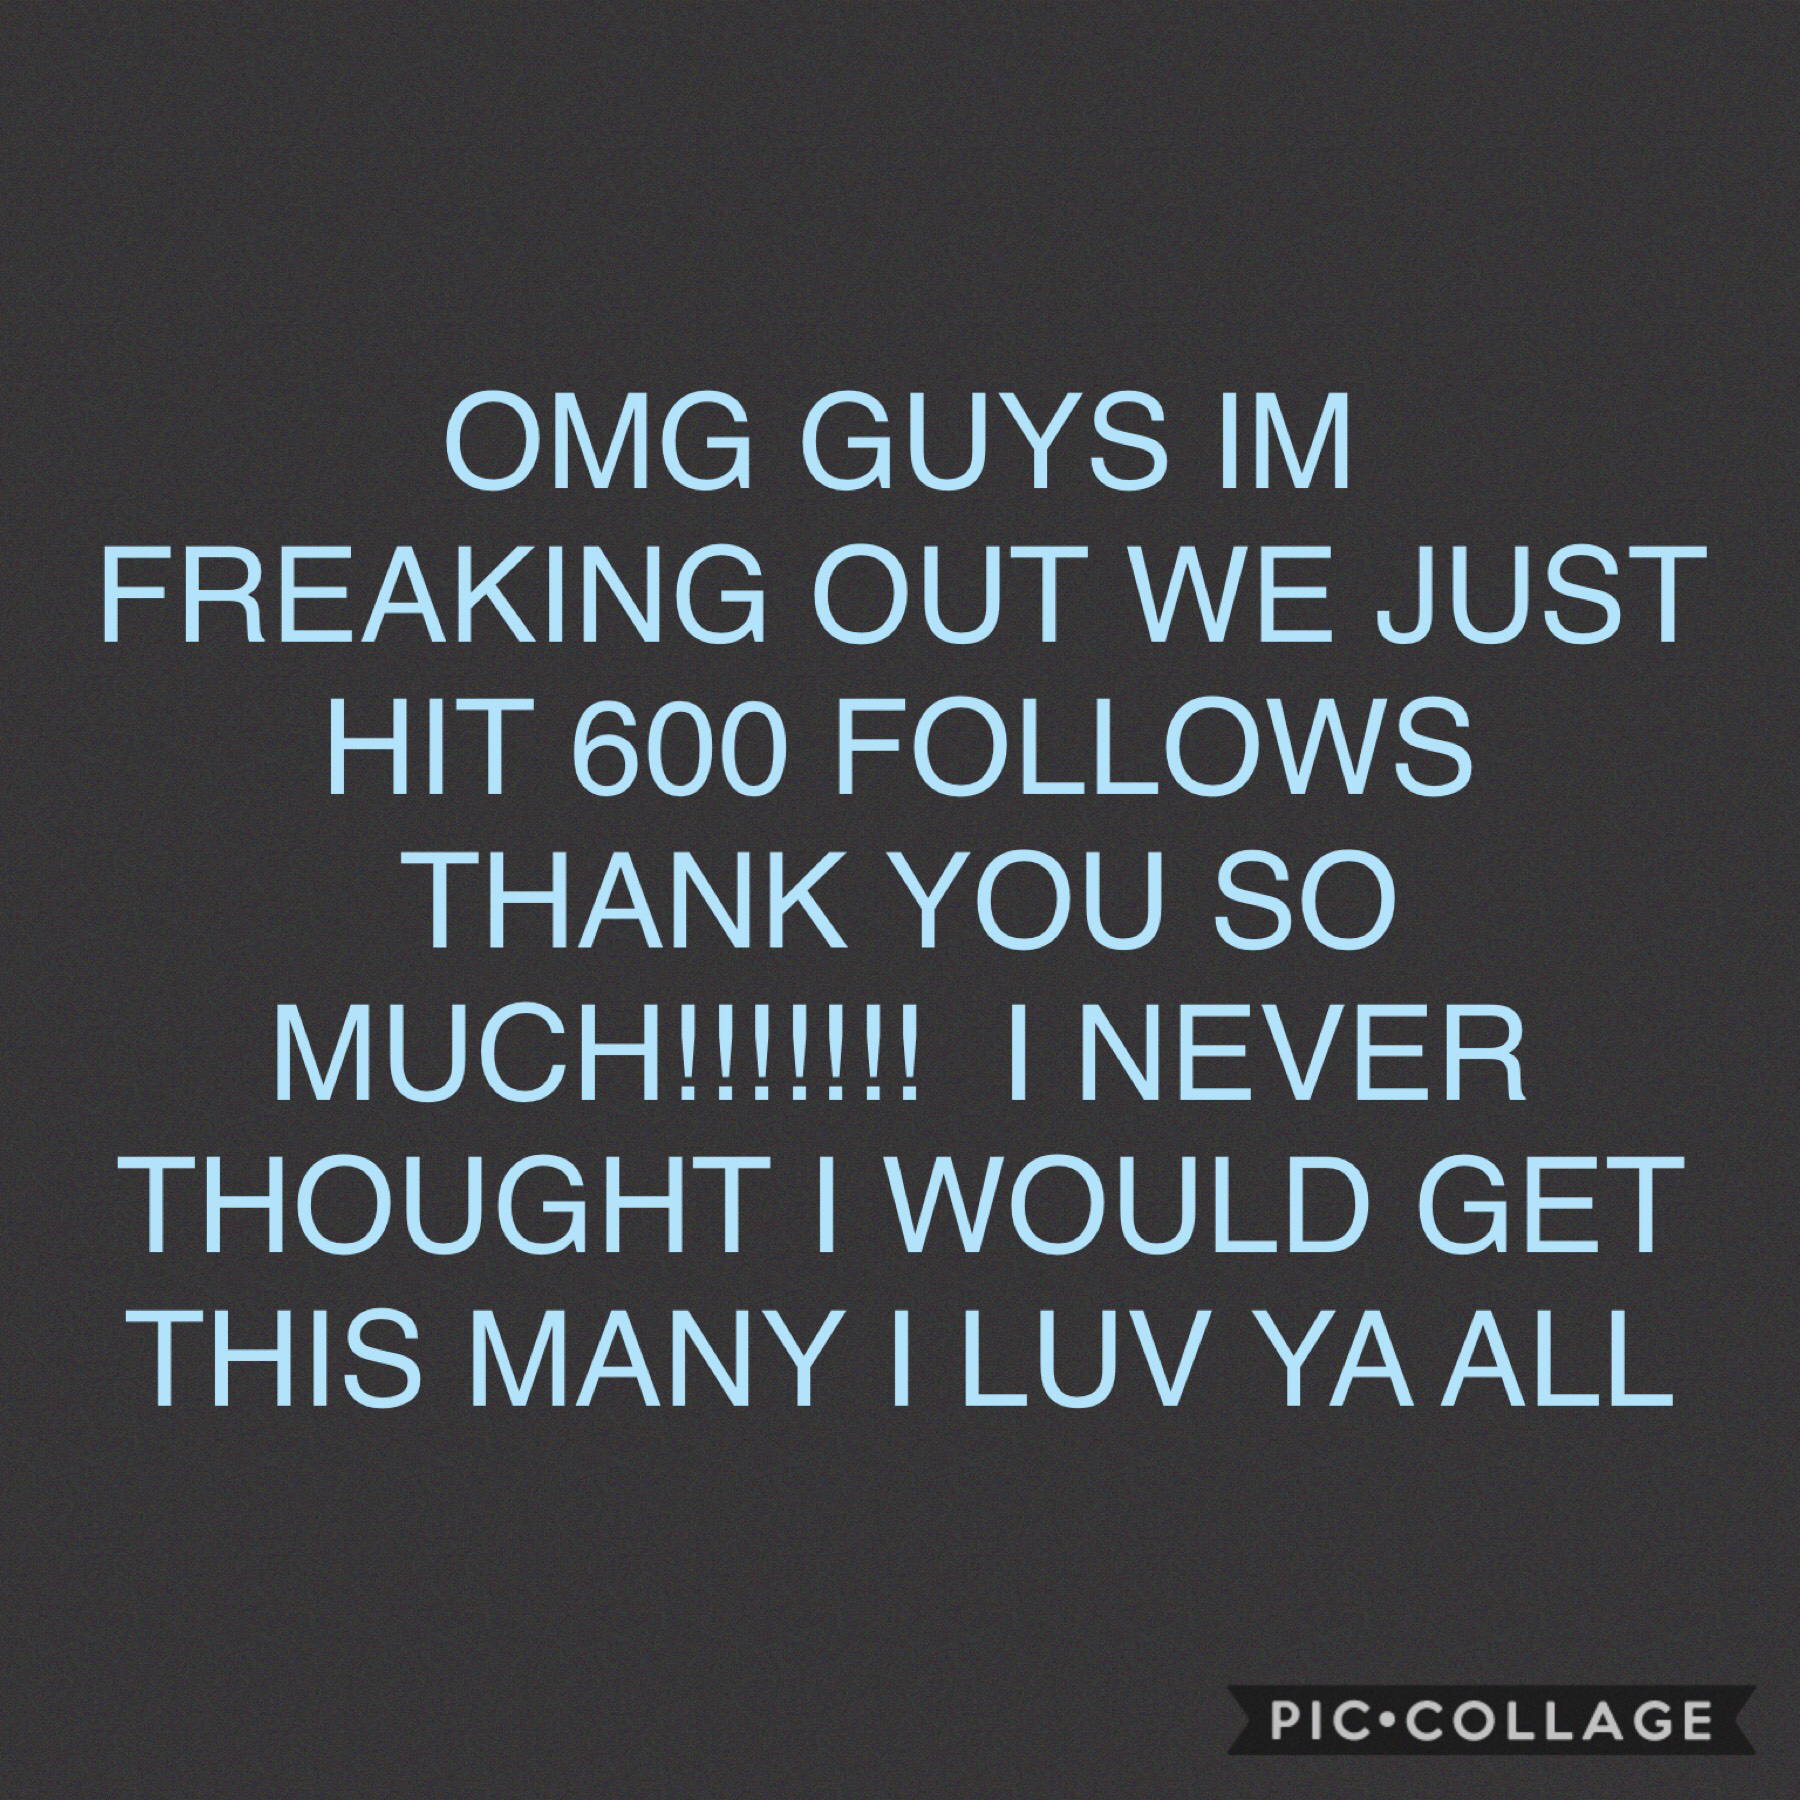 THANK YOU ALL